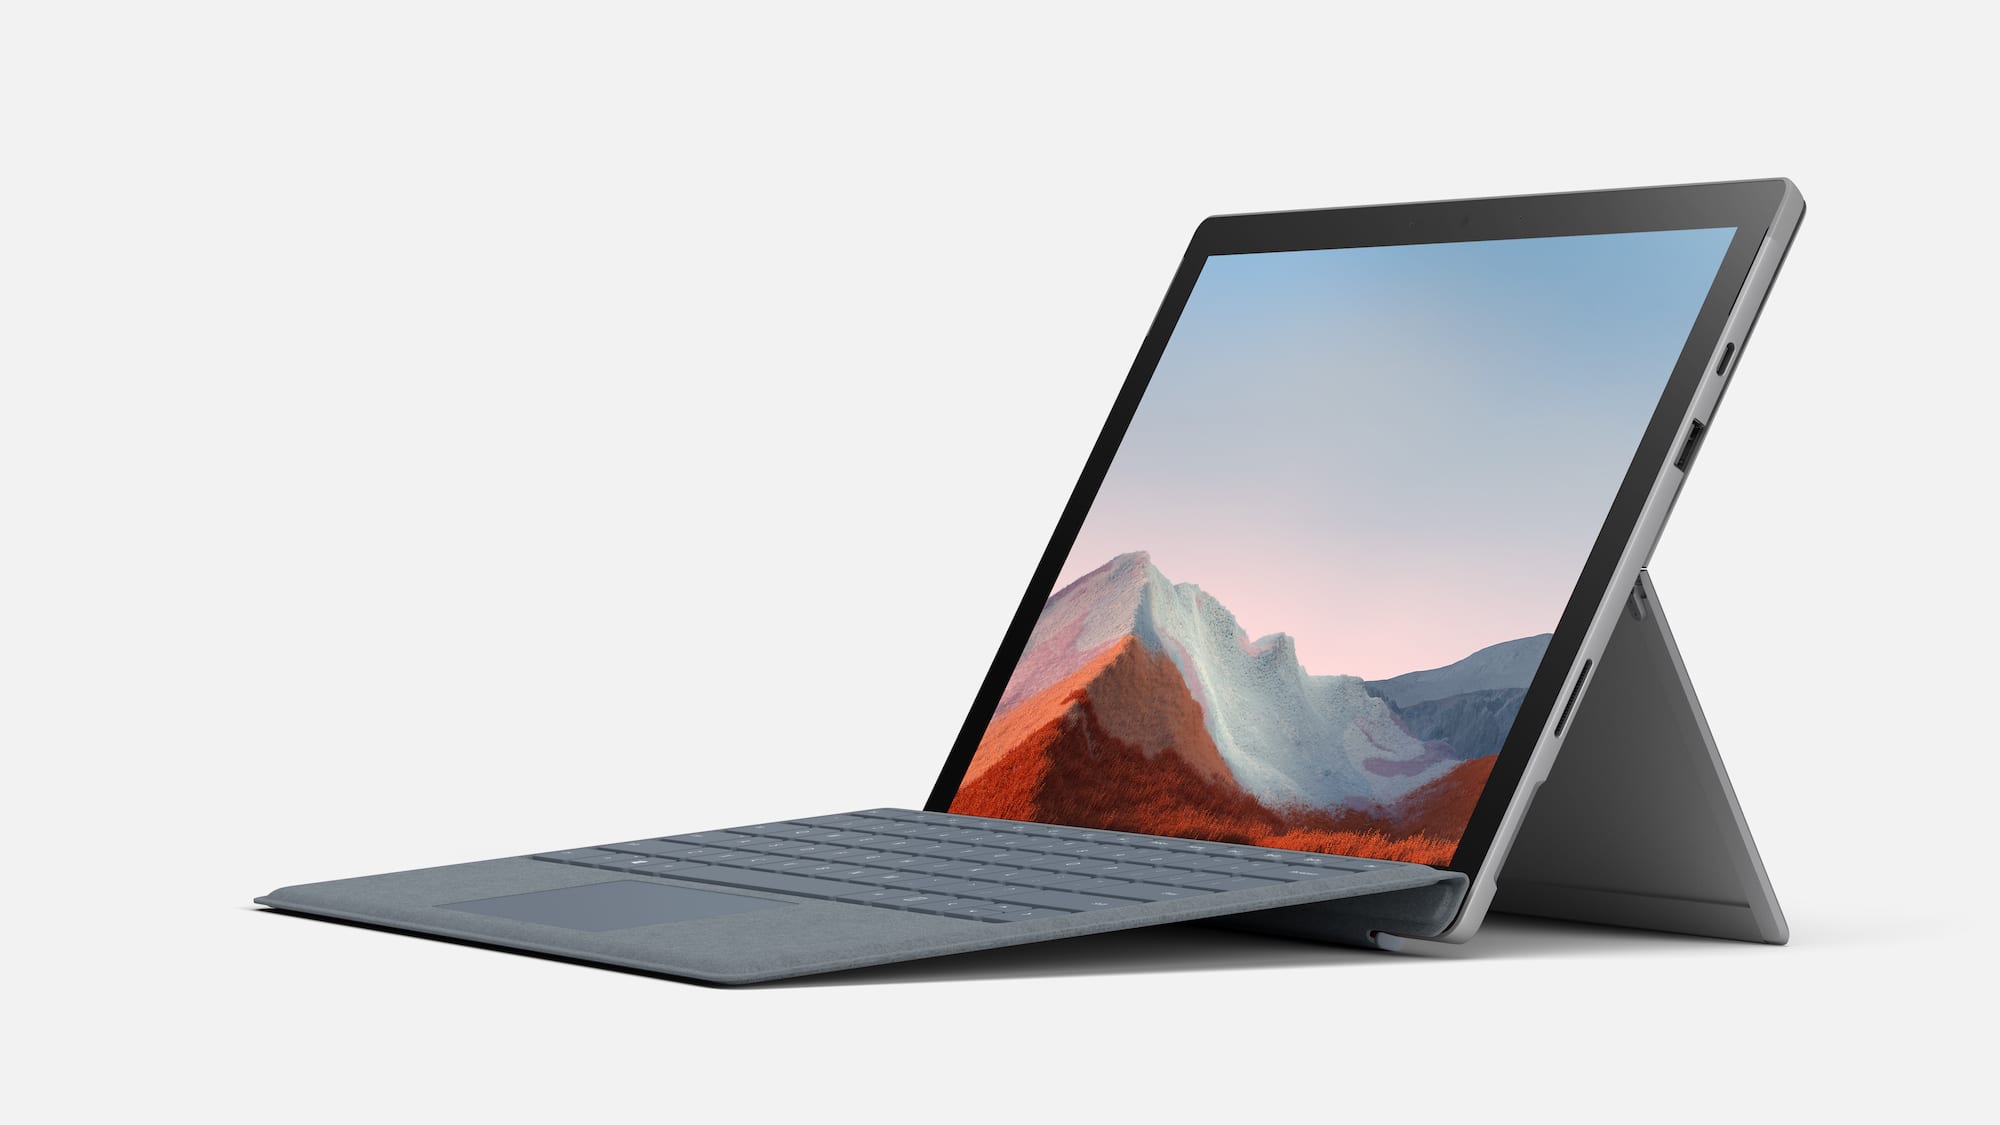 Announced Microsoft Surface Pro 7 Plus for Business, starting at $ 899